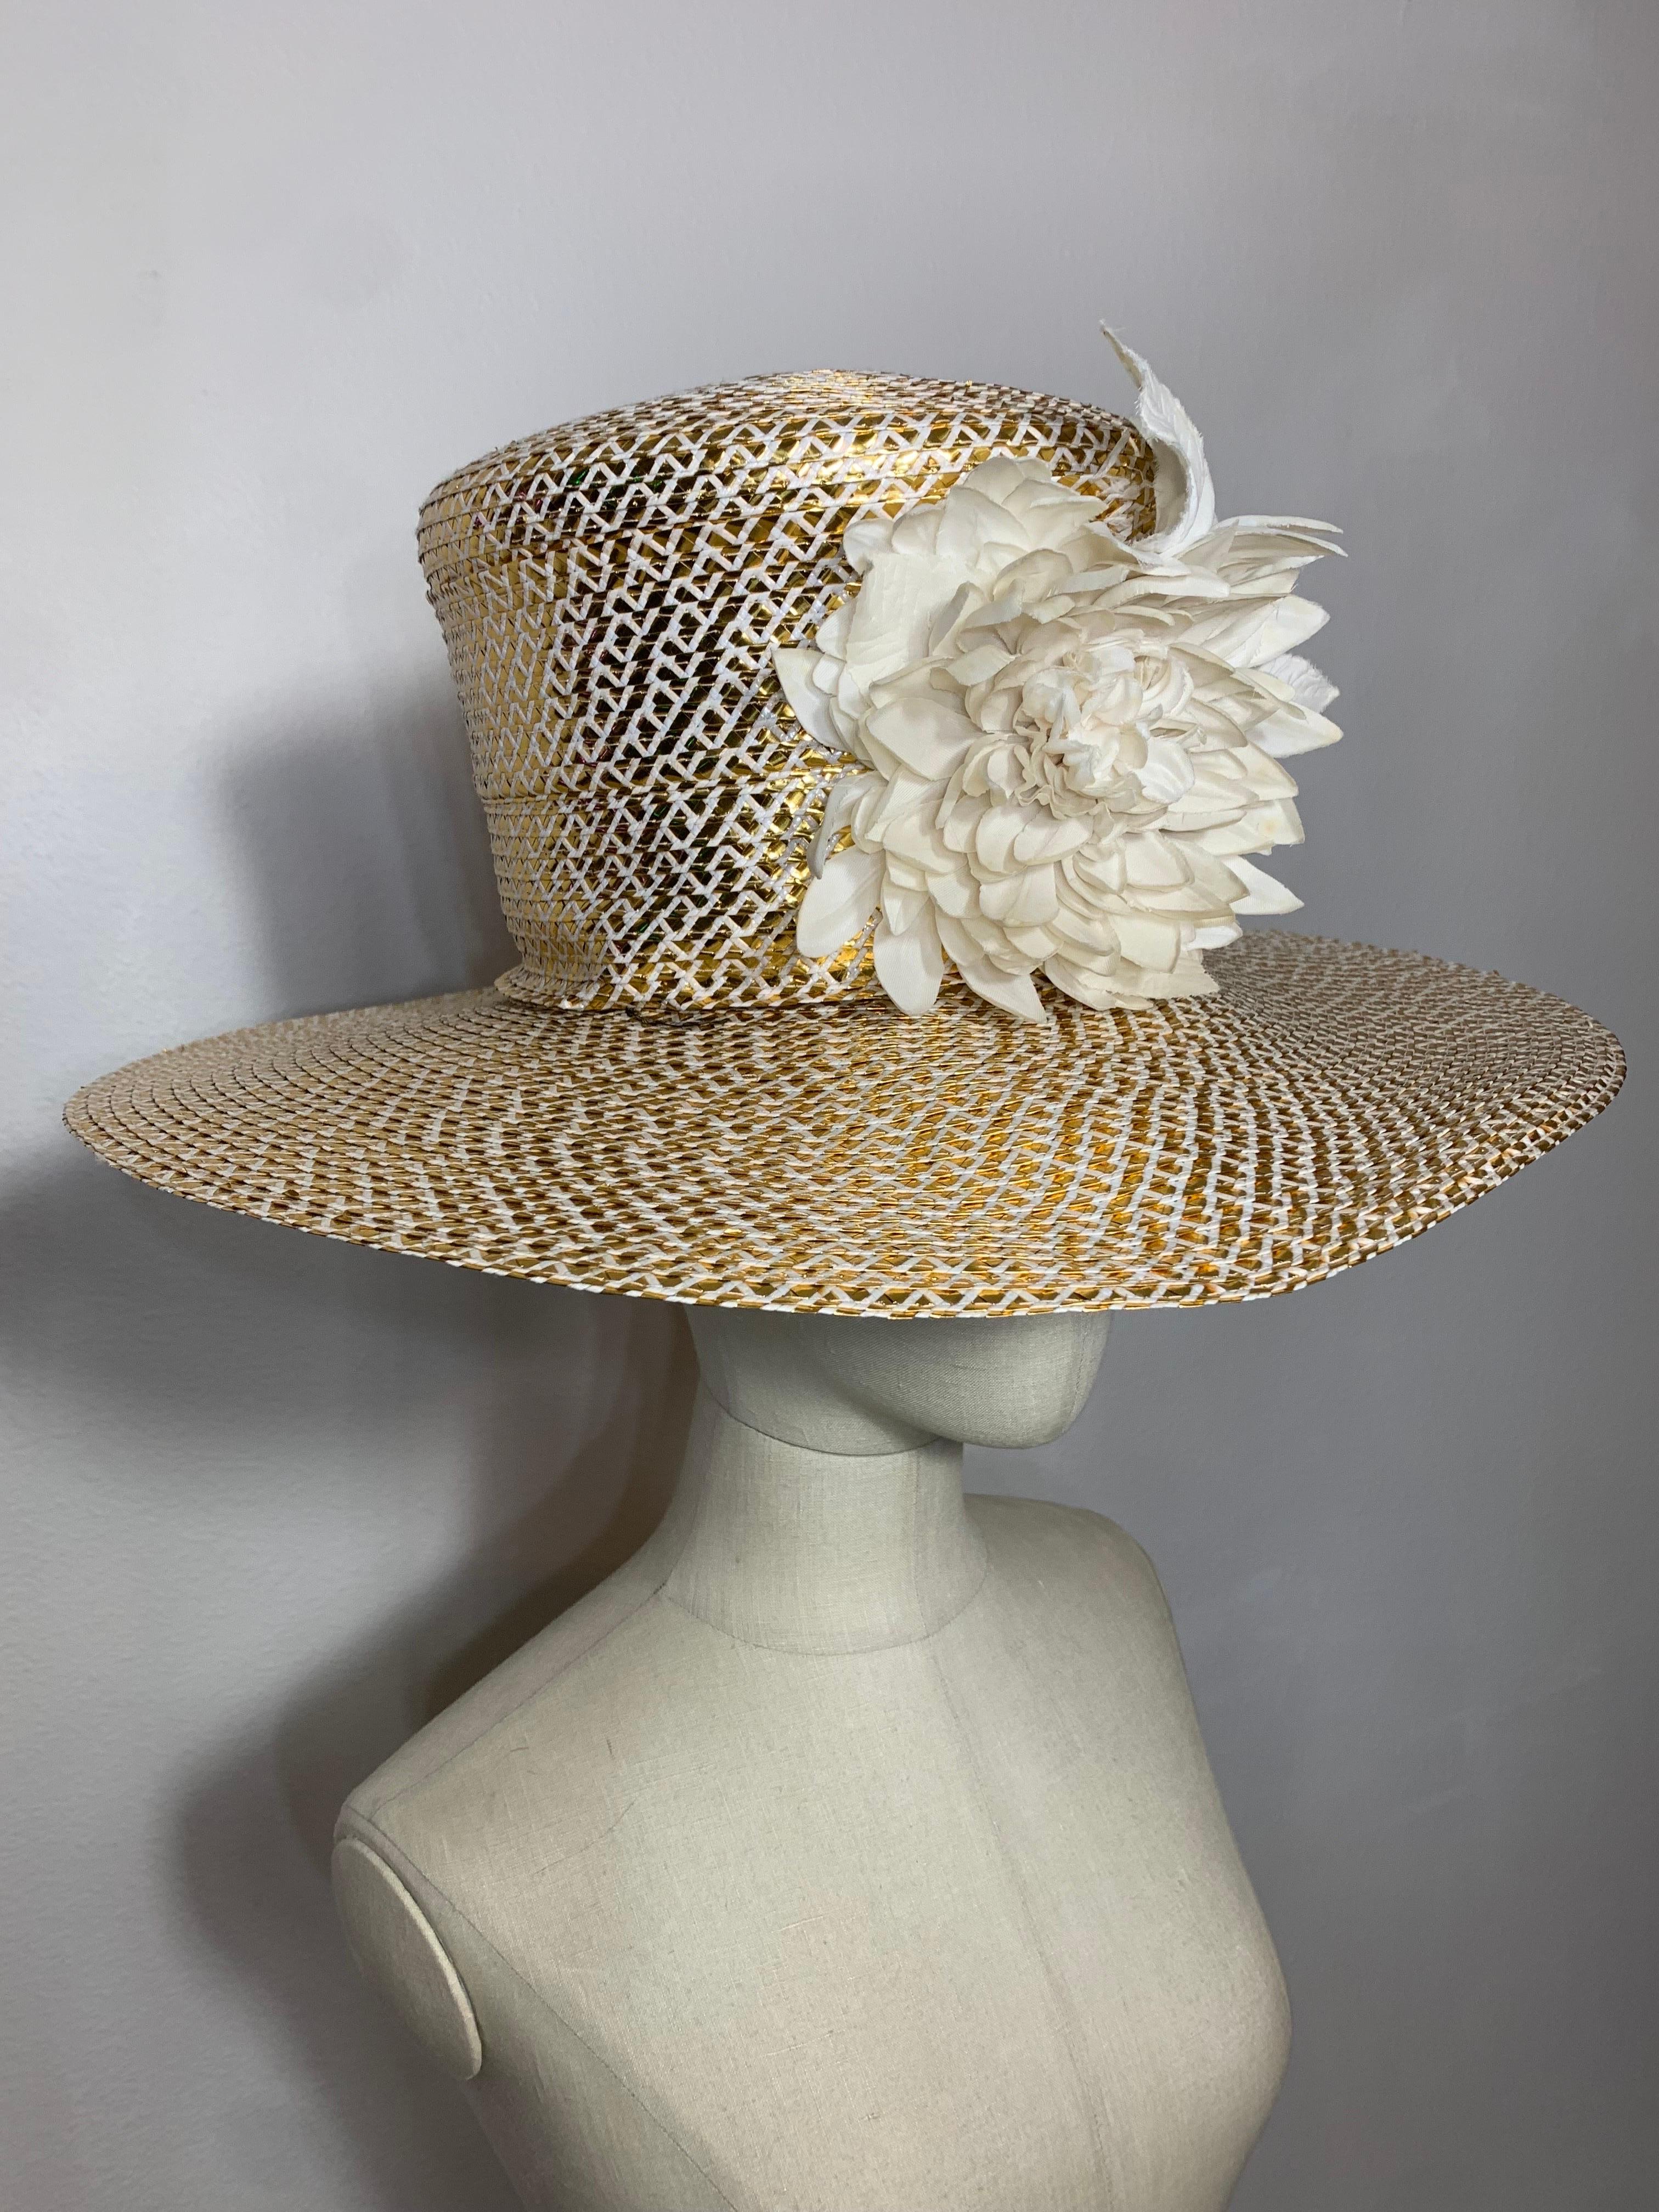 Custom Made Spring/Summer Gold & White Straw Medium Brim Tall Hat w Silk Florals: Fantastic quality hat made by Suzanne Couture Millinery in a unique mix of straws with layered hatband and white silk floral embellishment. Inner grosgrain band. Brim